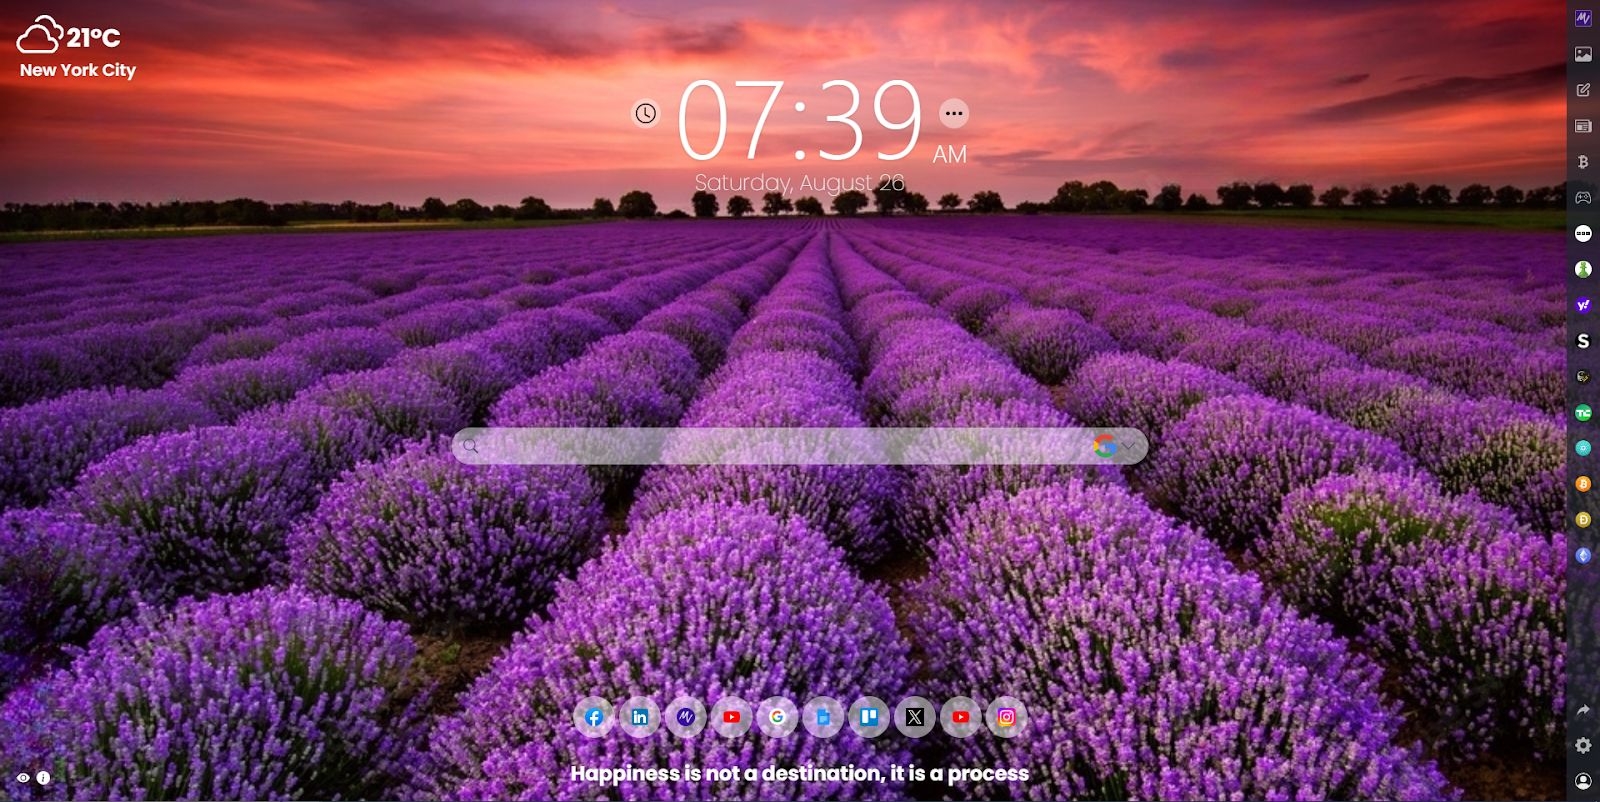 Basking in Lavender Bliss: MeaVana Chrome Extension's Lavender Field Experiences